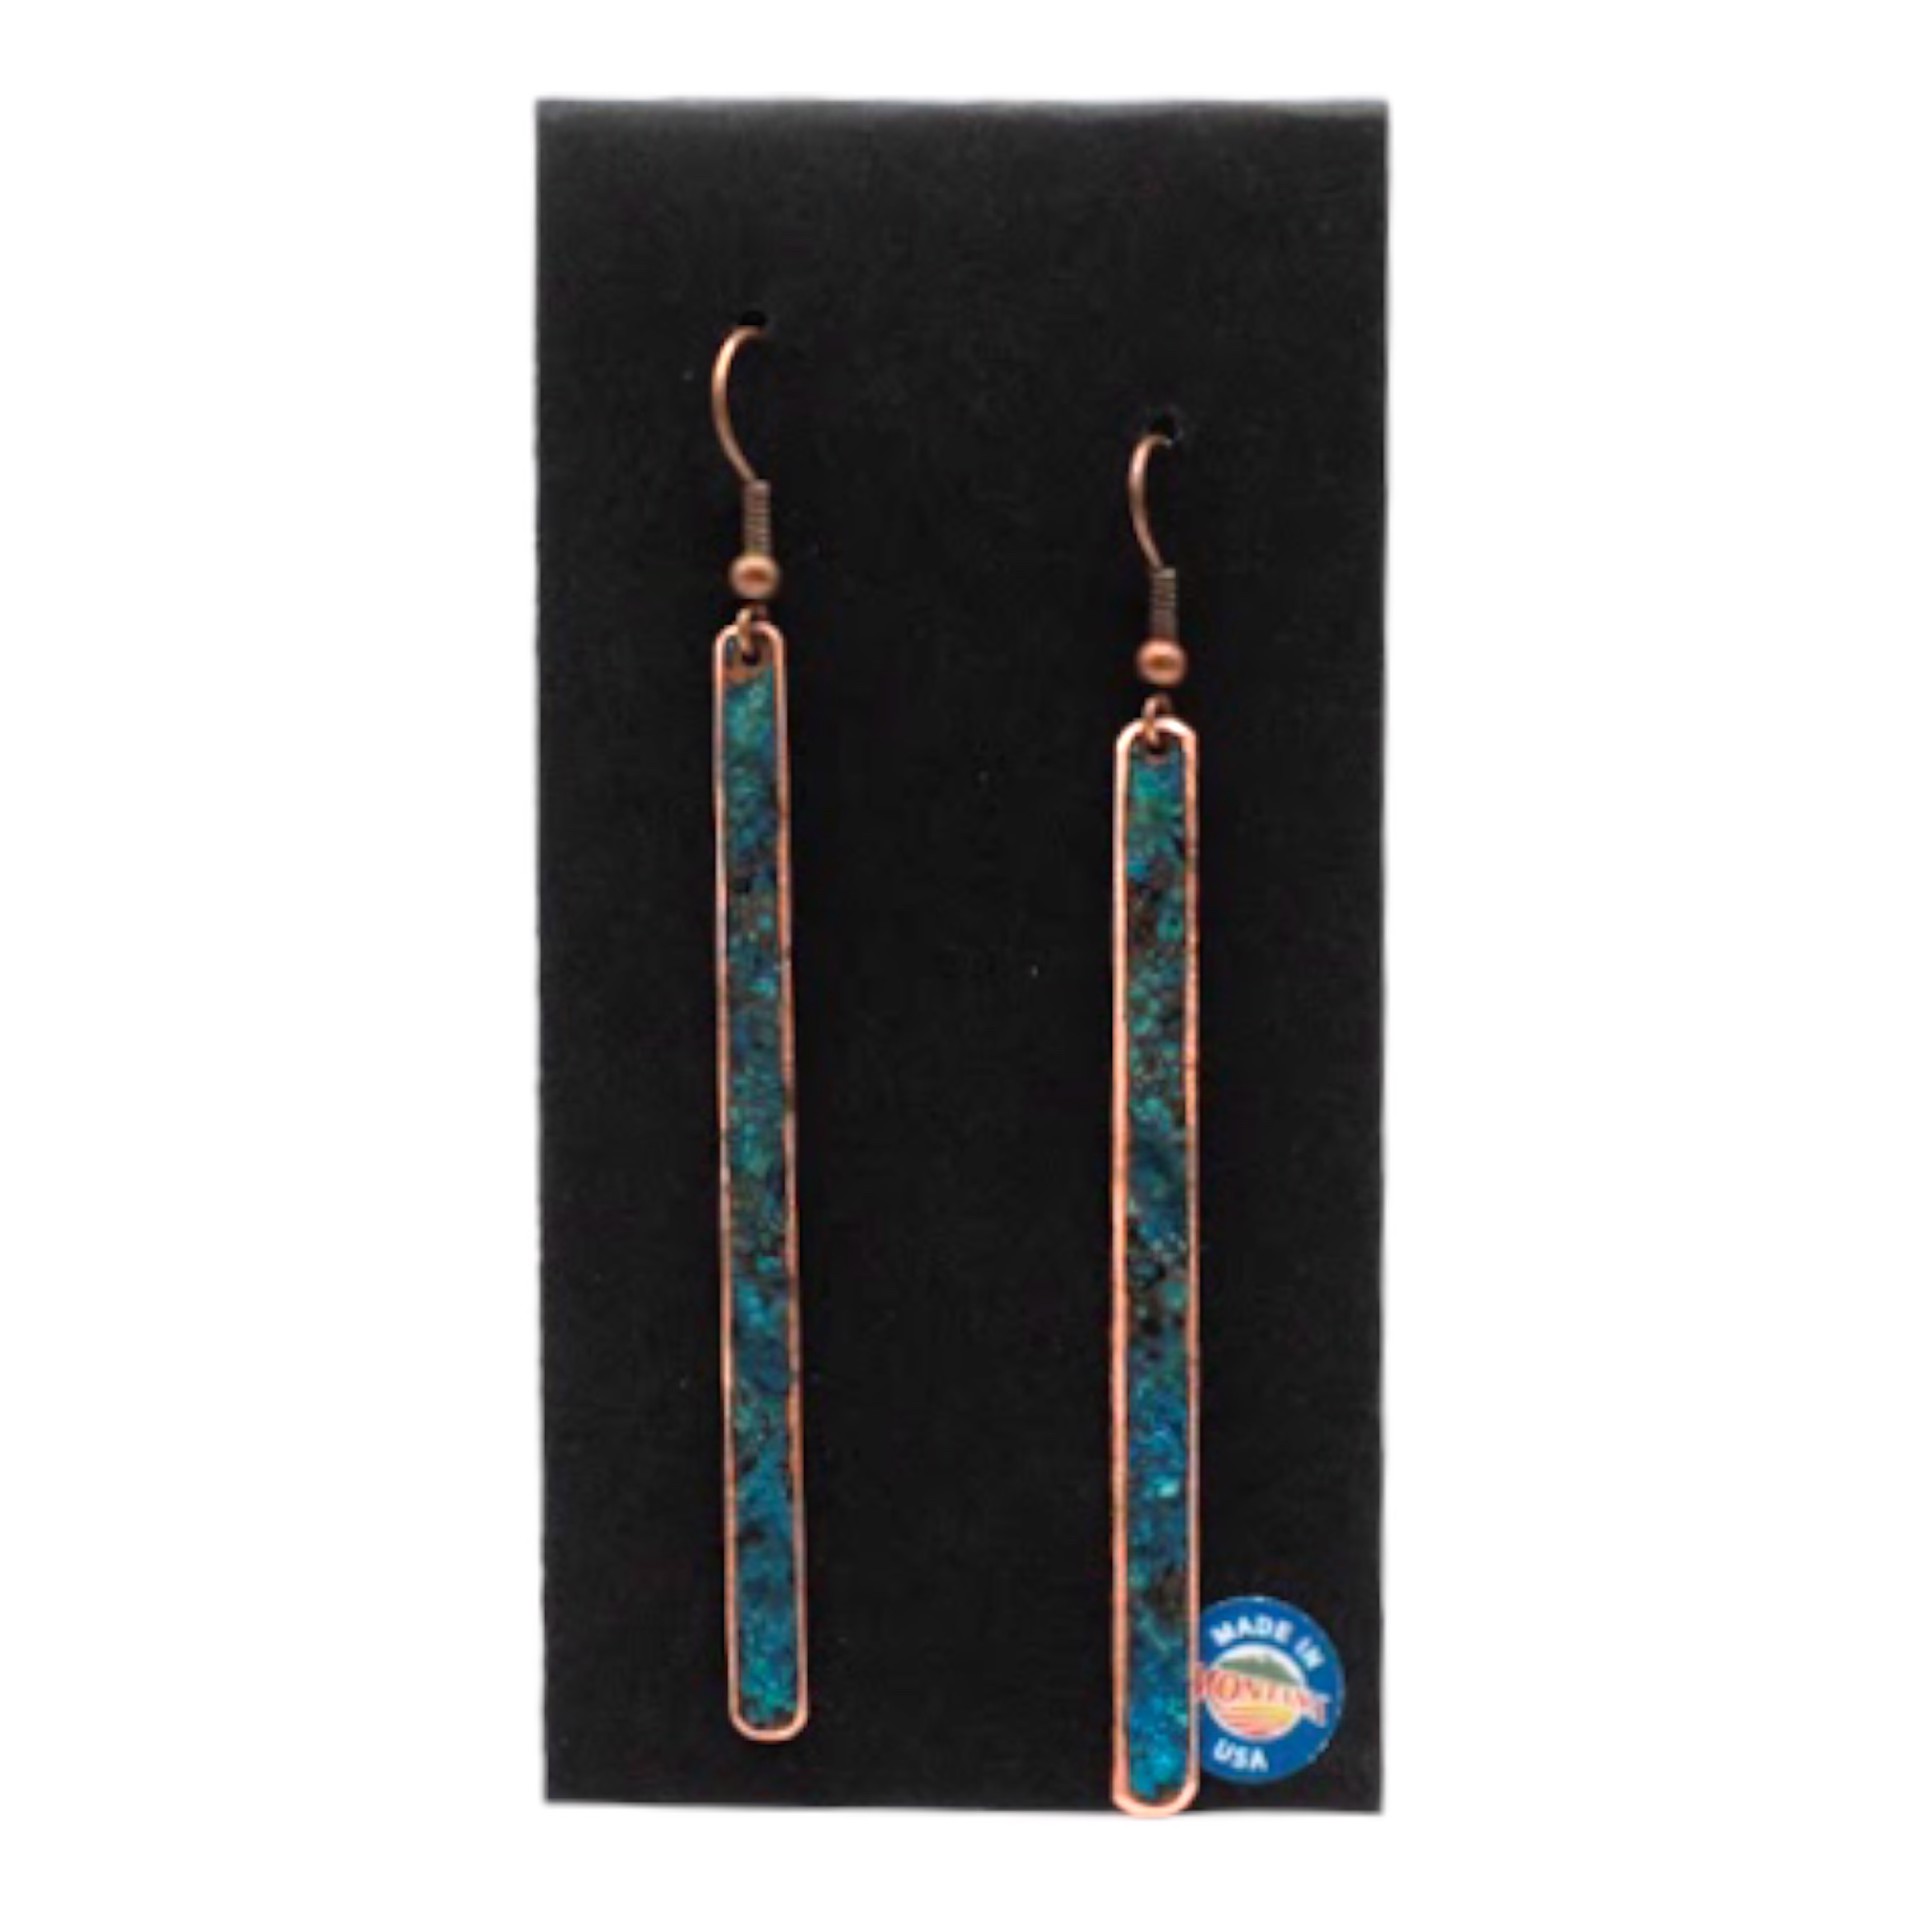 Aged Copper Earrings by Kay Langland